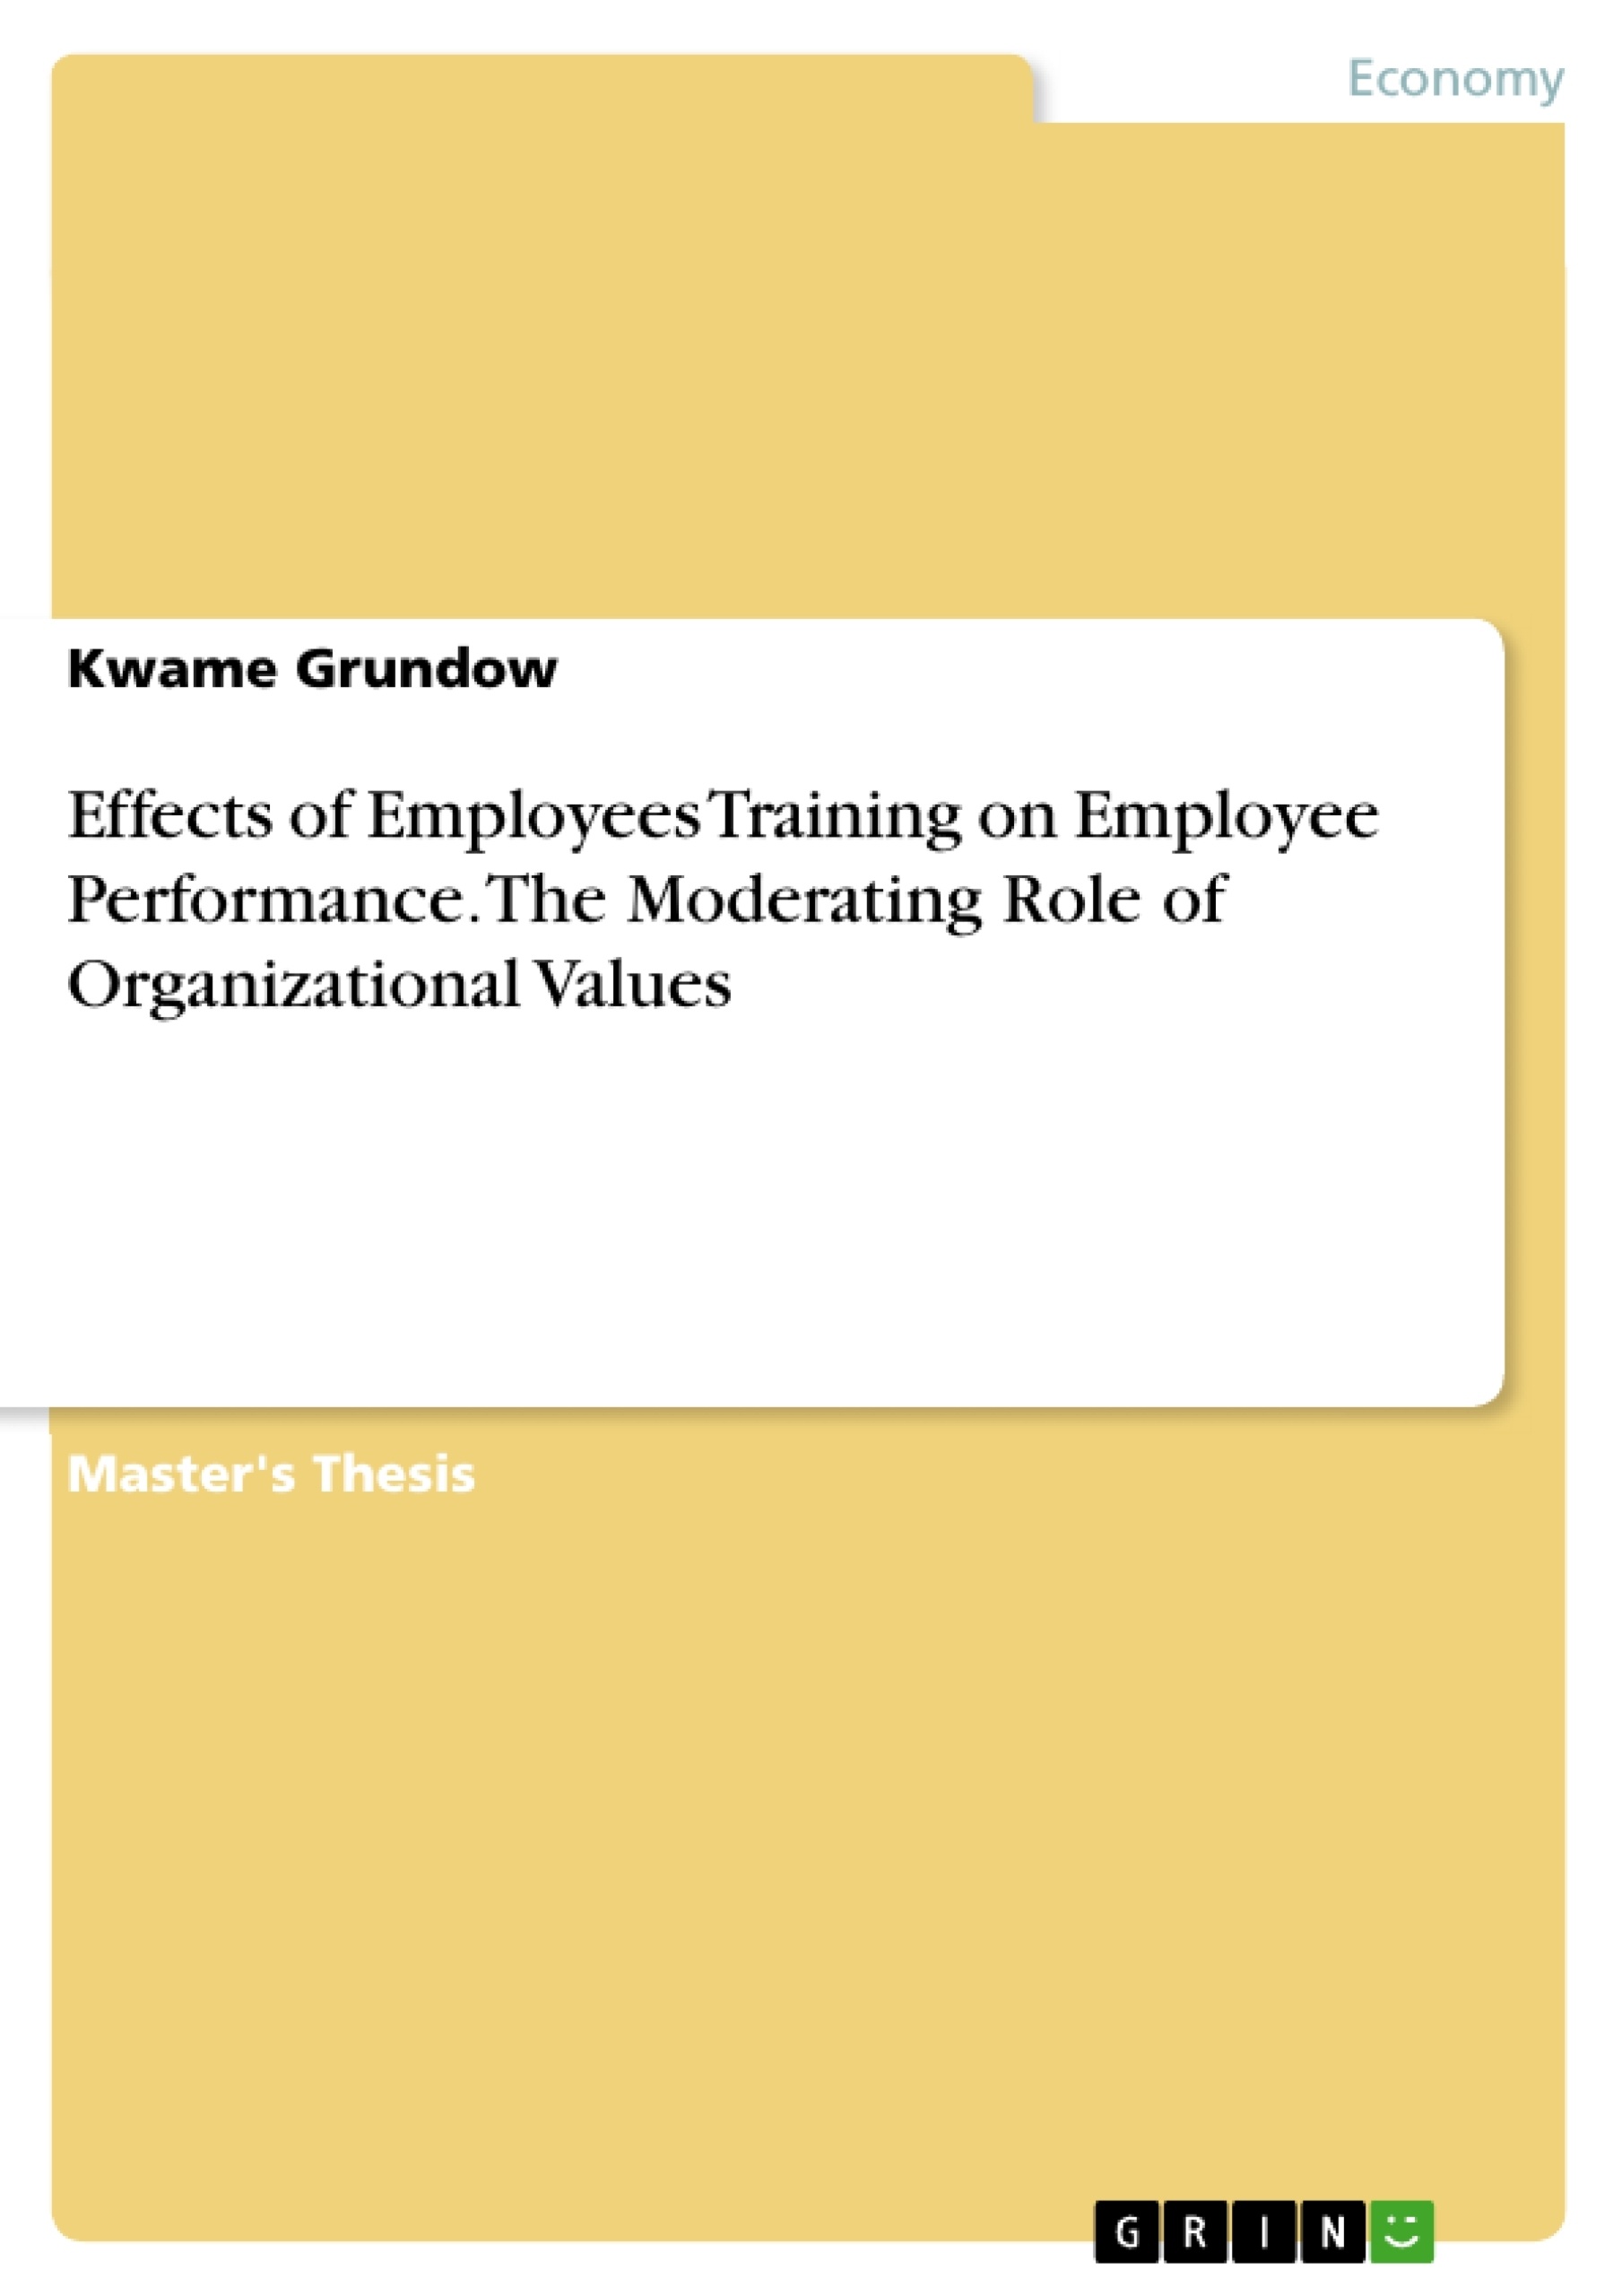 Title: Effects of Employees Training on Employee Performance. The Moderating Role of Organizational Values